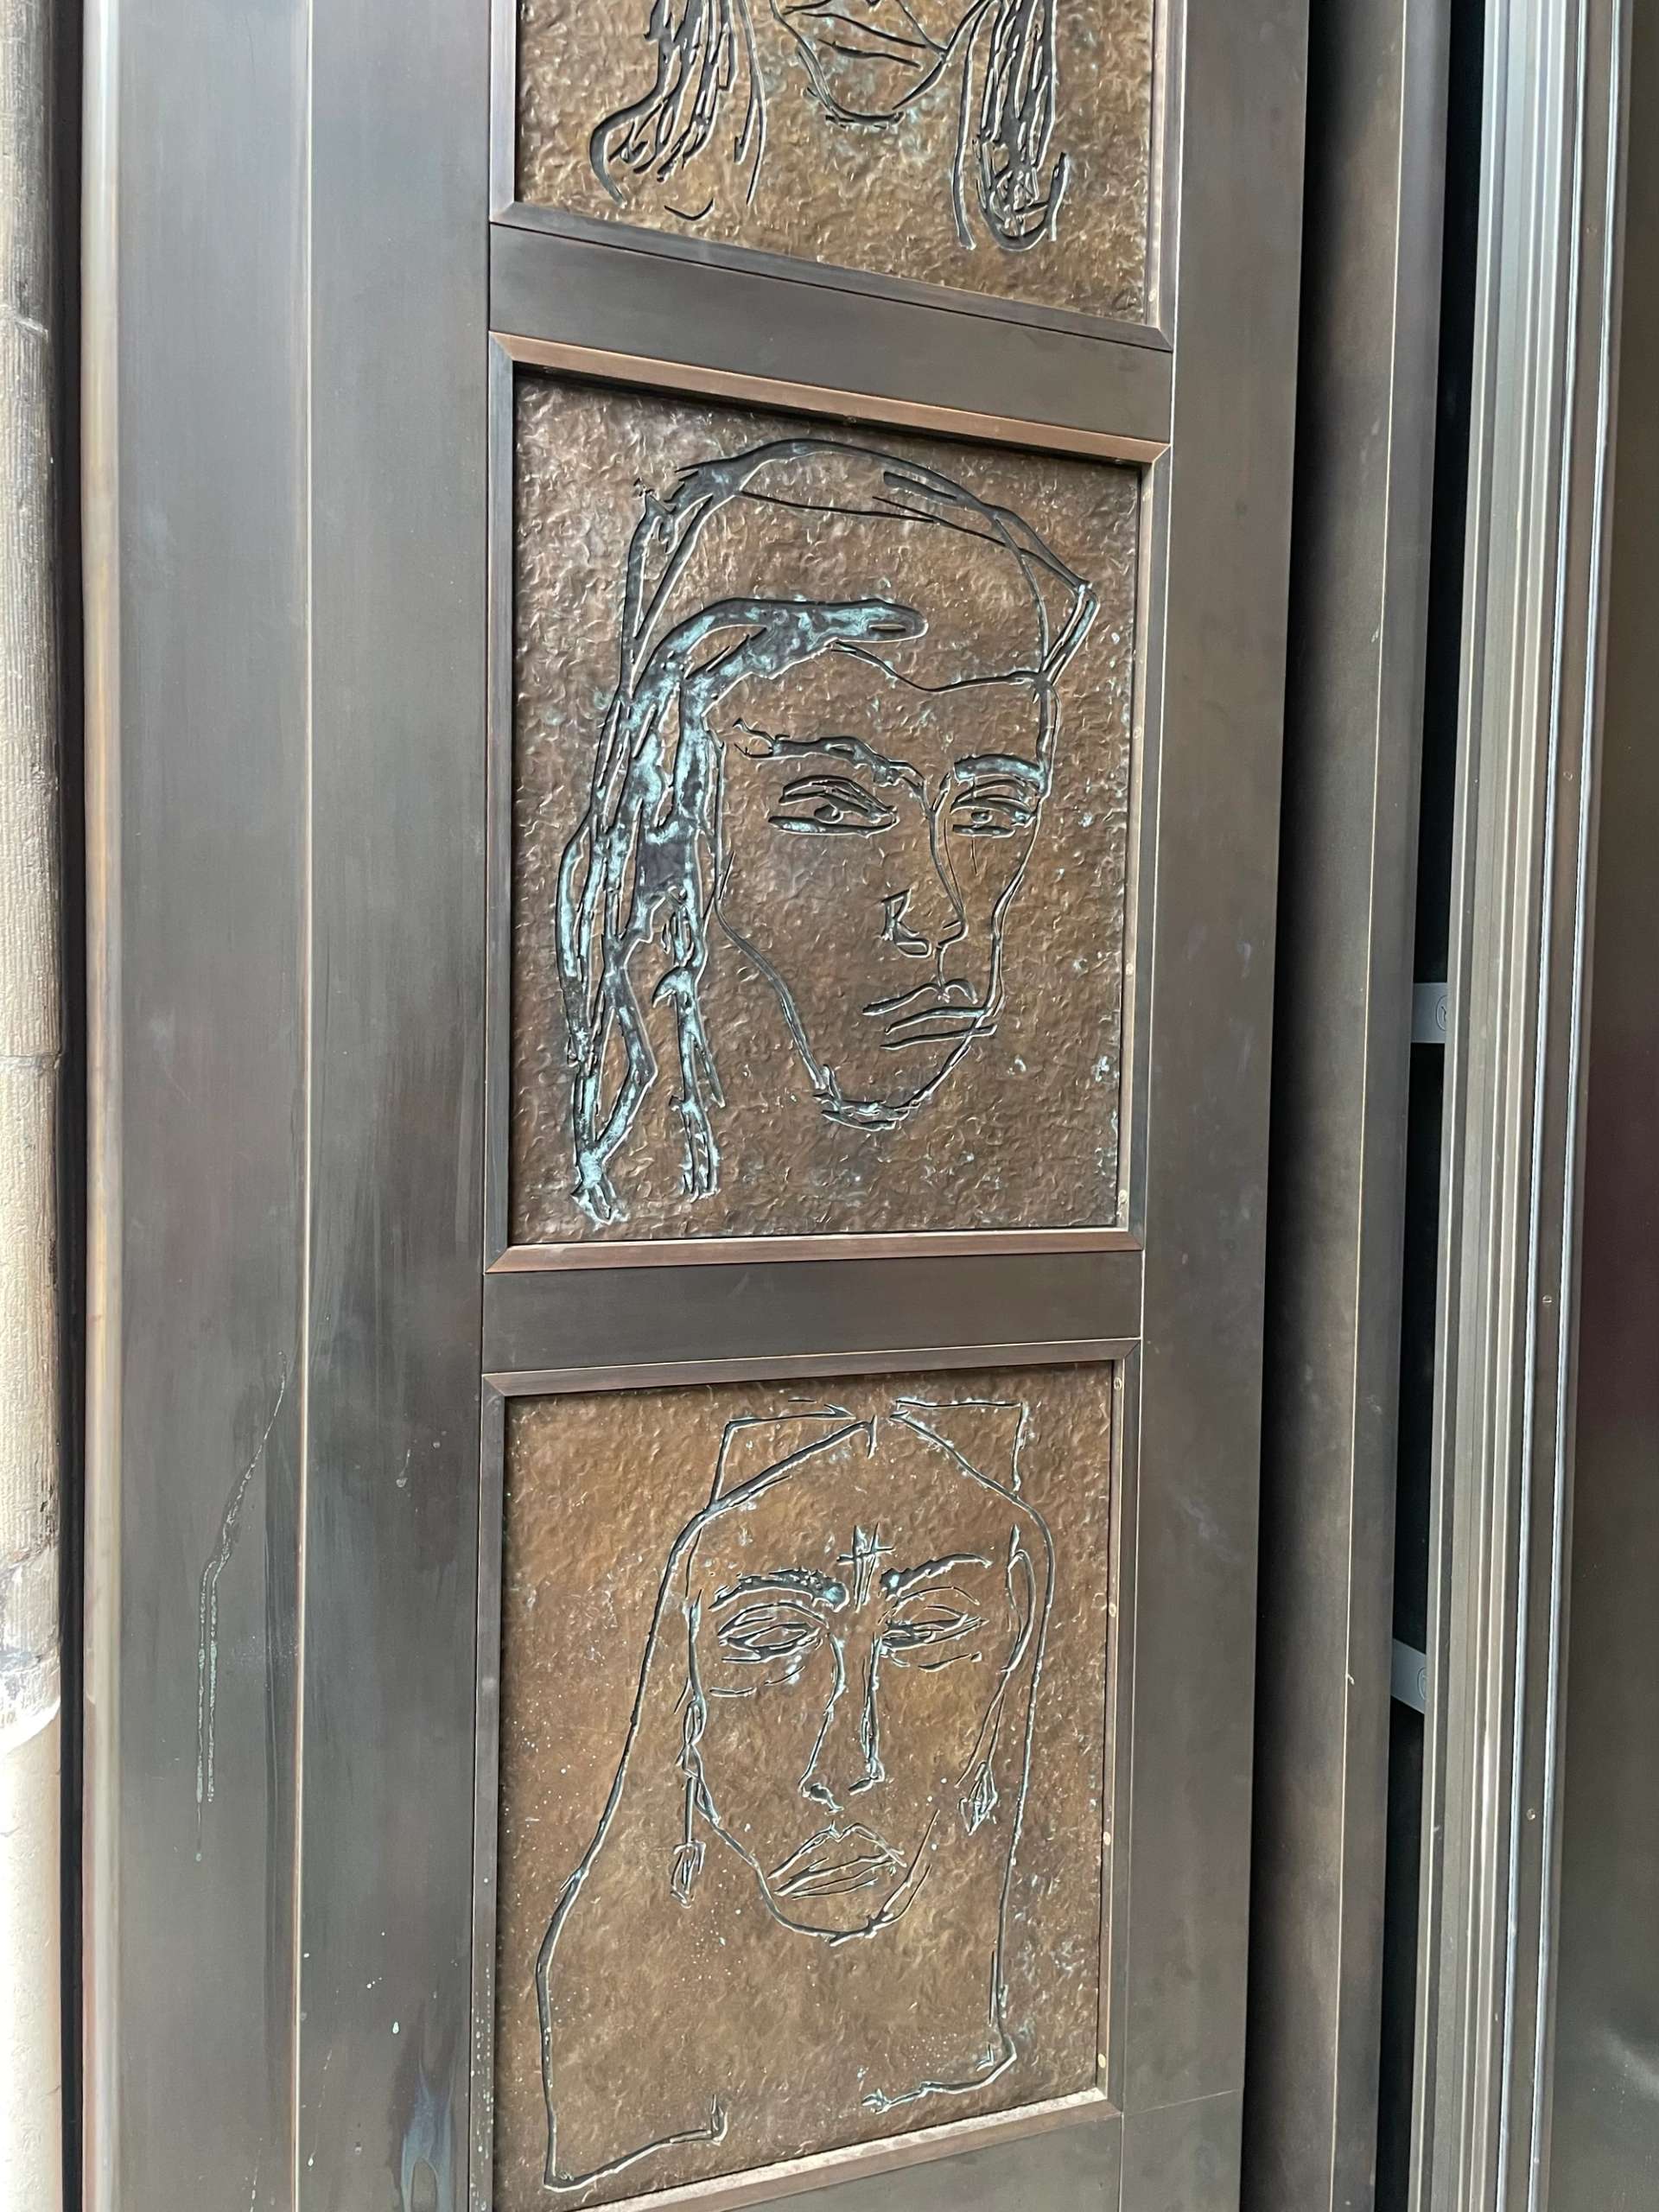 A photograph of The Doors (2023), an installation work by artist Tracey Emin. A close-up photograph of two portraits of women on the bronze doors of the National Portrait Gallery in London.